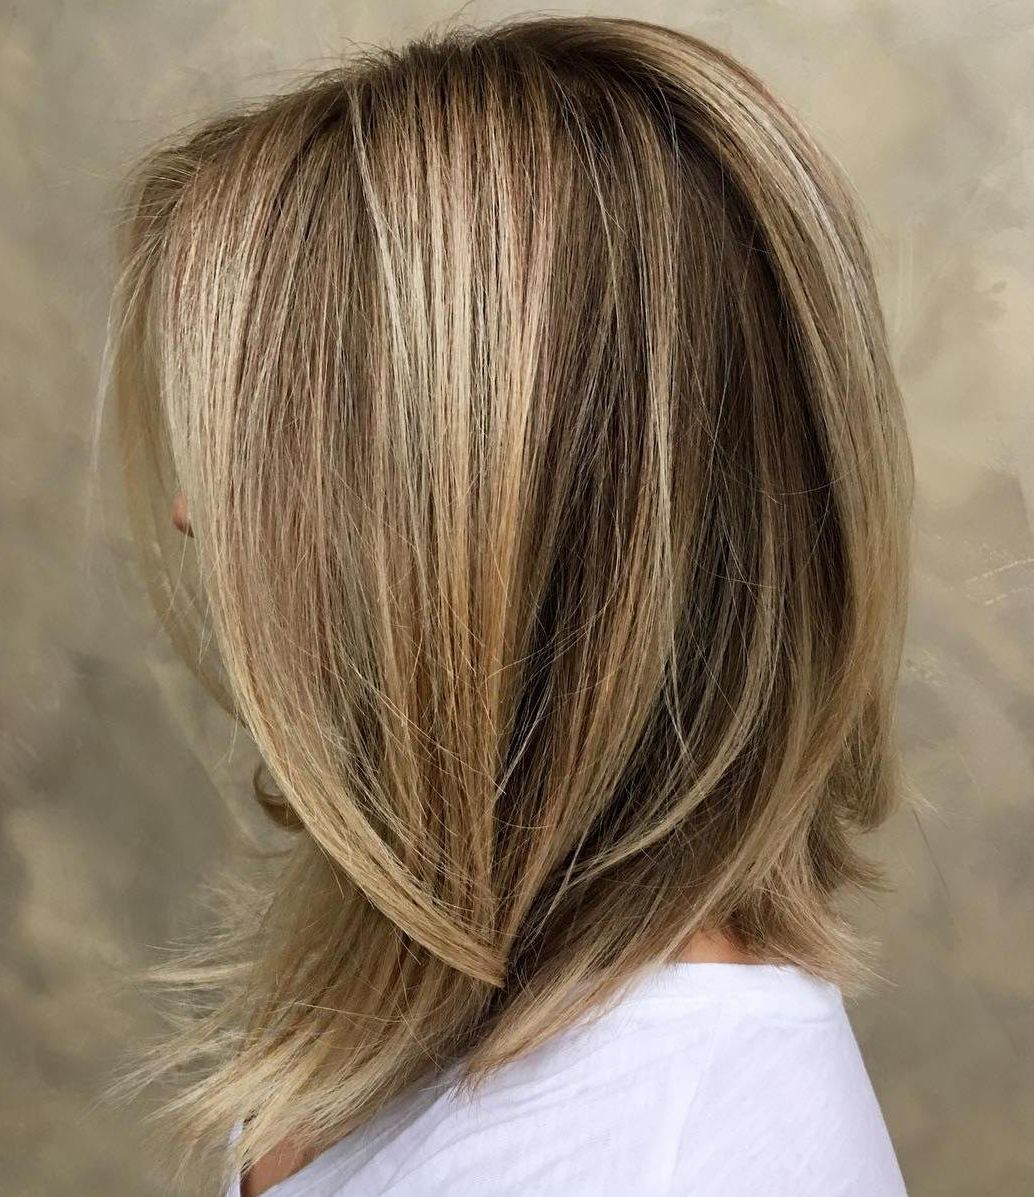 60 Inspiring Long Bob Hairstyles And Long Bob Haircuts For 2019 Intended For Most Recently Released Two Tier Caramel Blonde Lob Hairstyles (View 6 of 20)